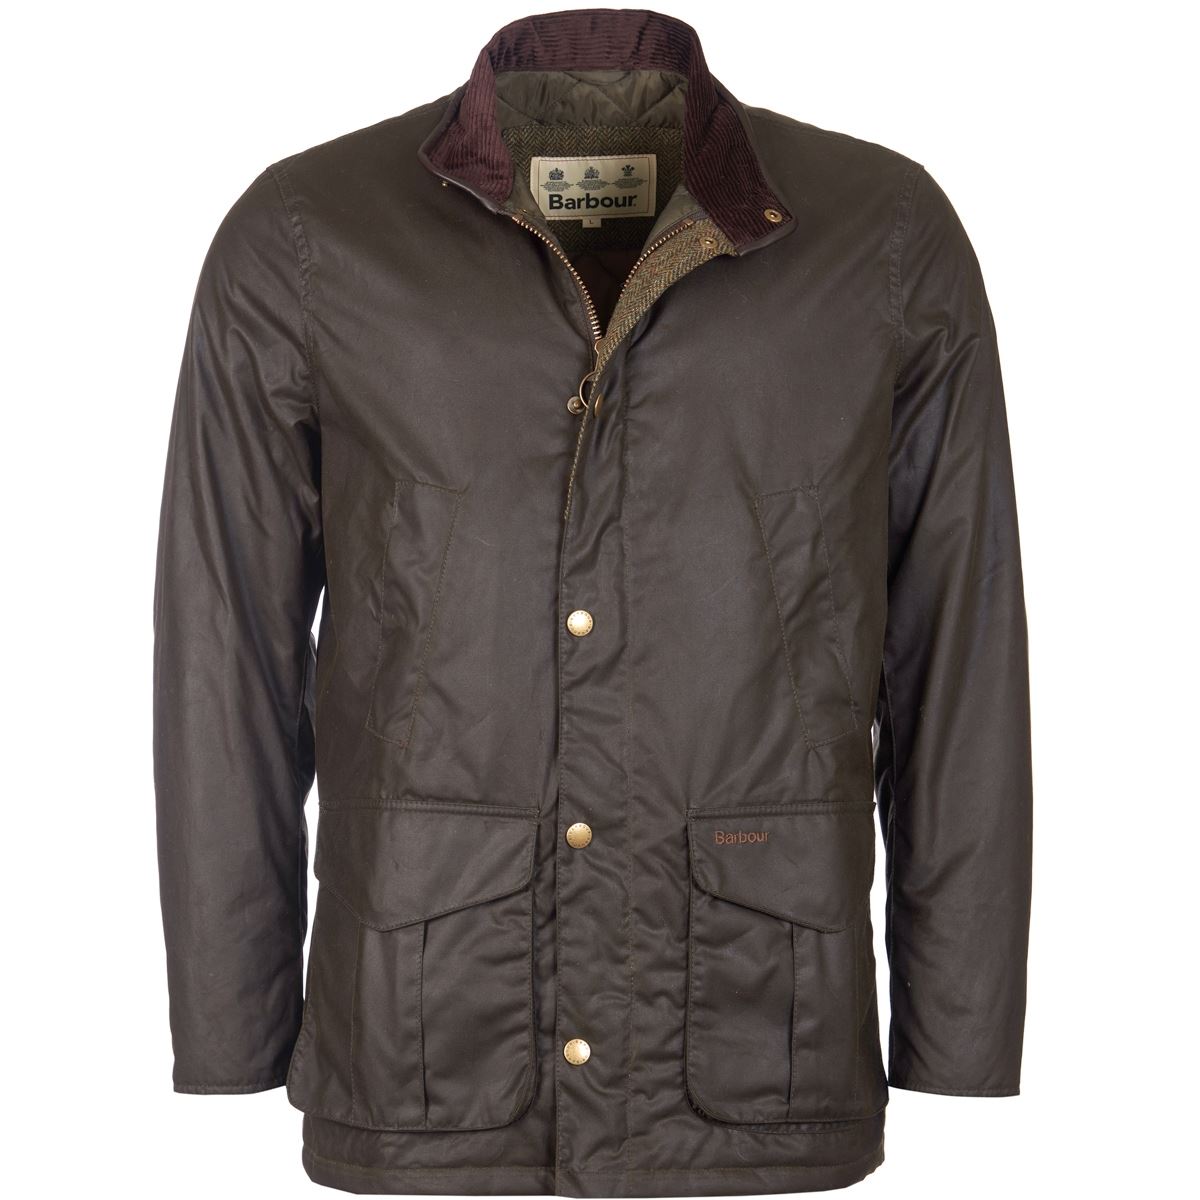 What is the outer fabric of the Barbour Hereford Wax Jacket?